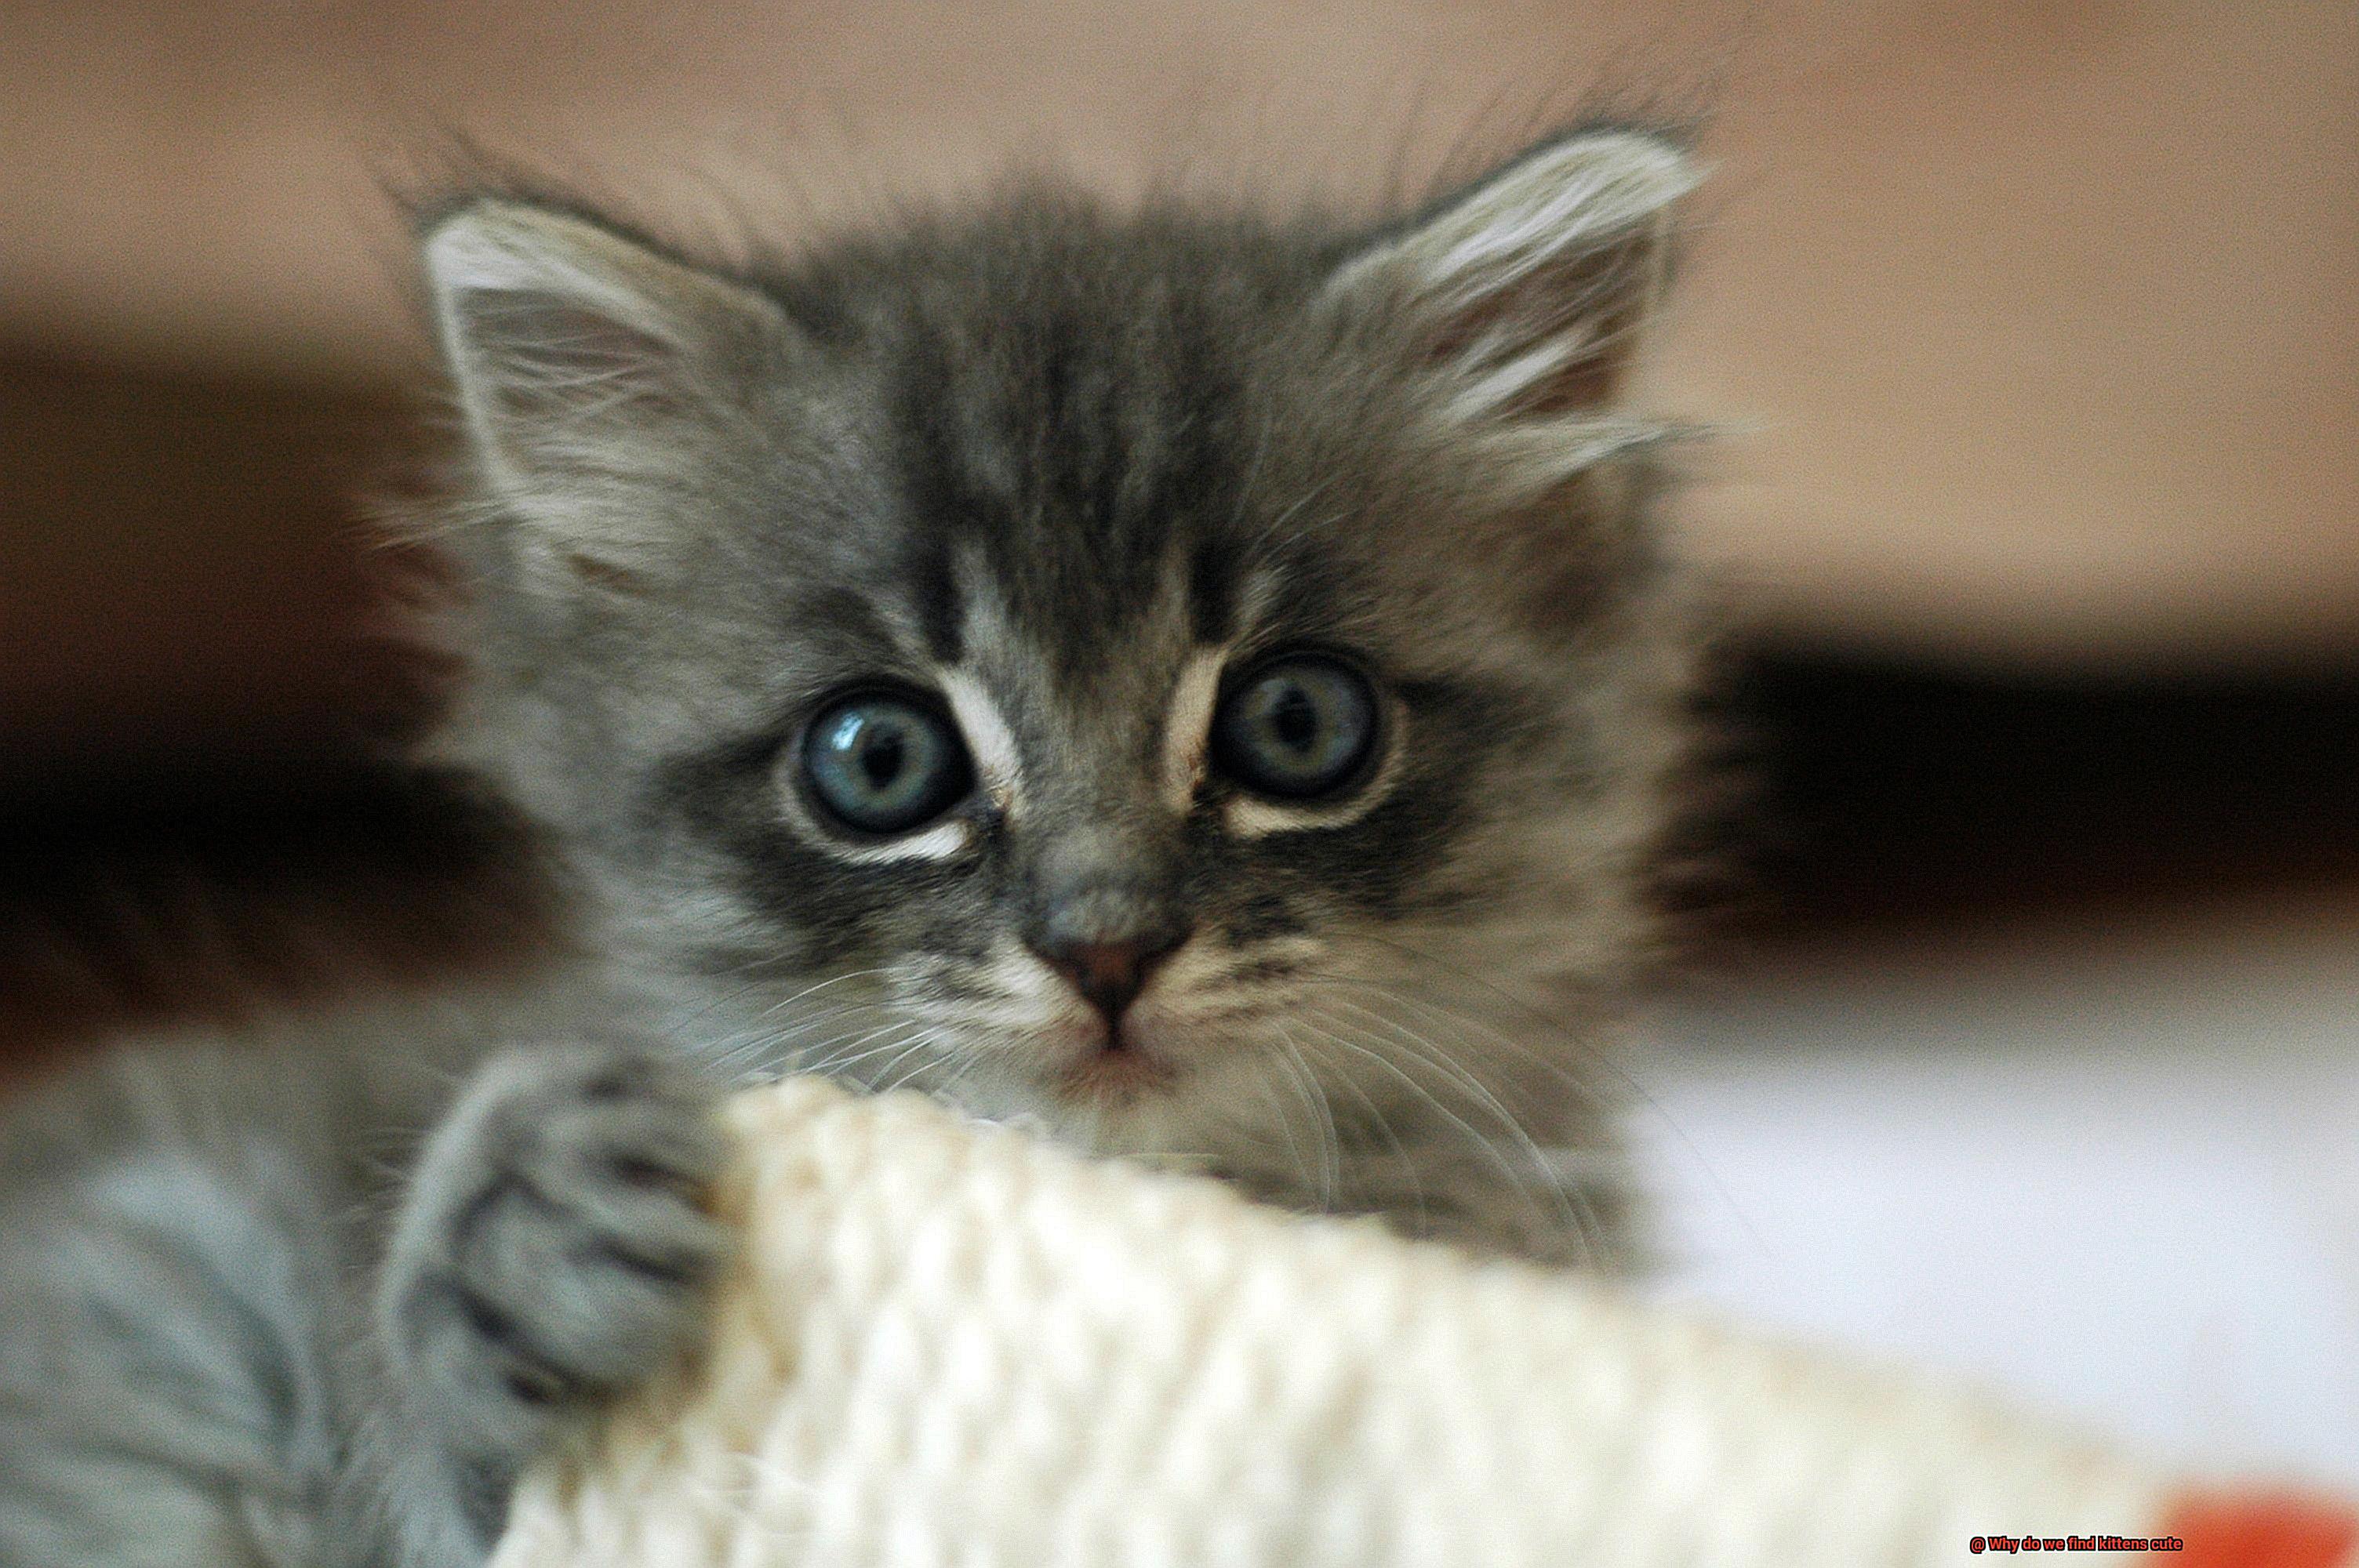 Why do we find kittens cute-2